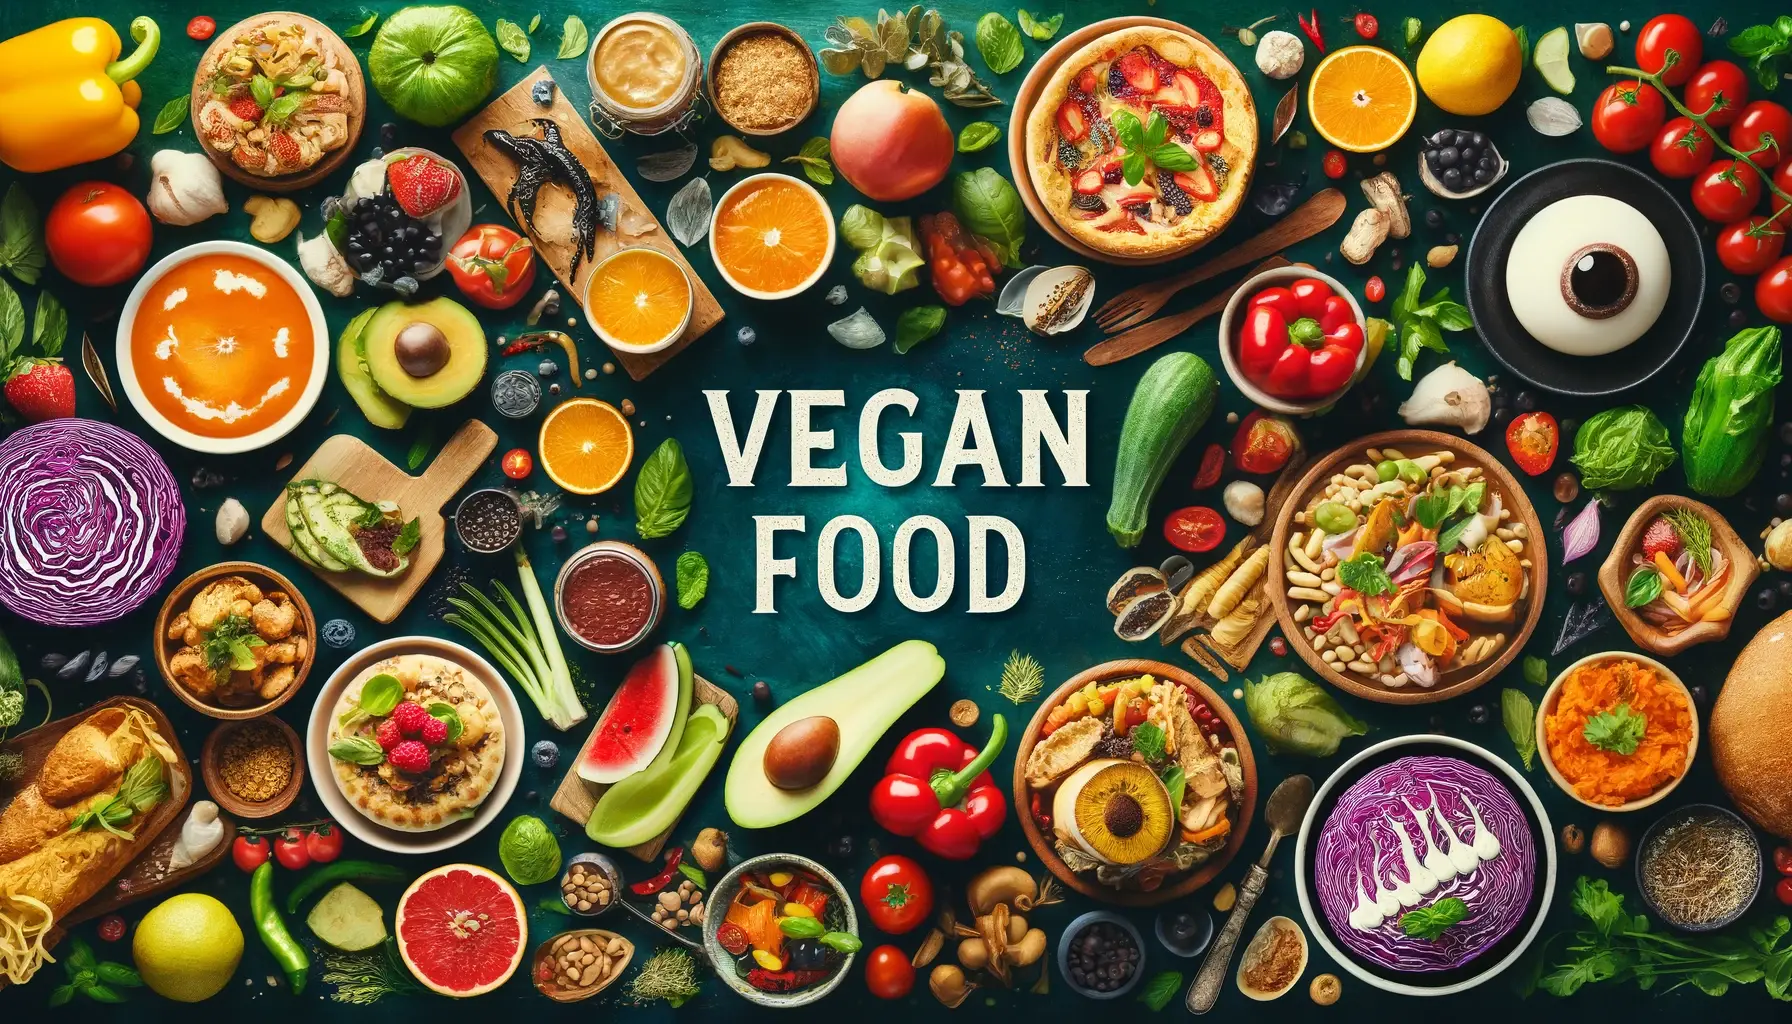 Vegan Food, image that features a variety of delicious vegan dishes arranged aesthetically.